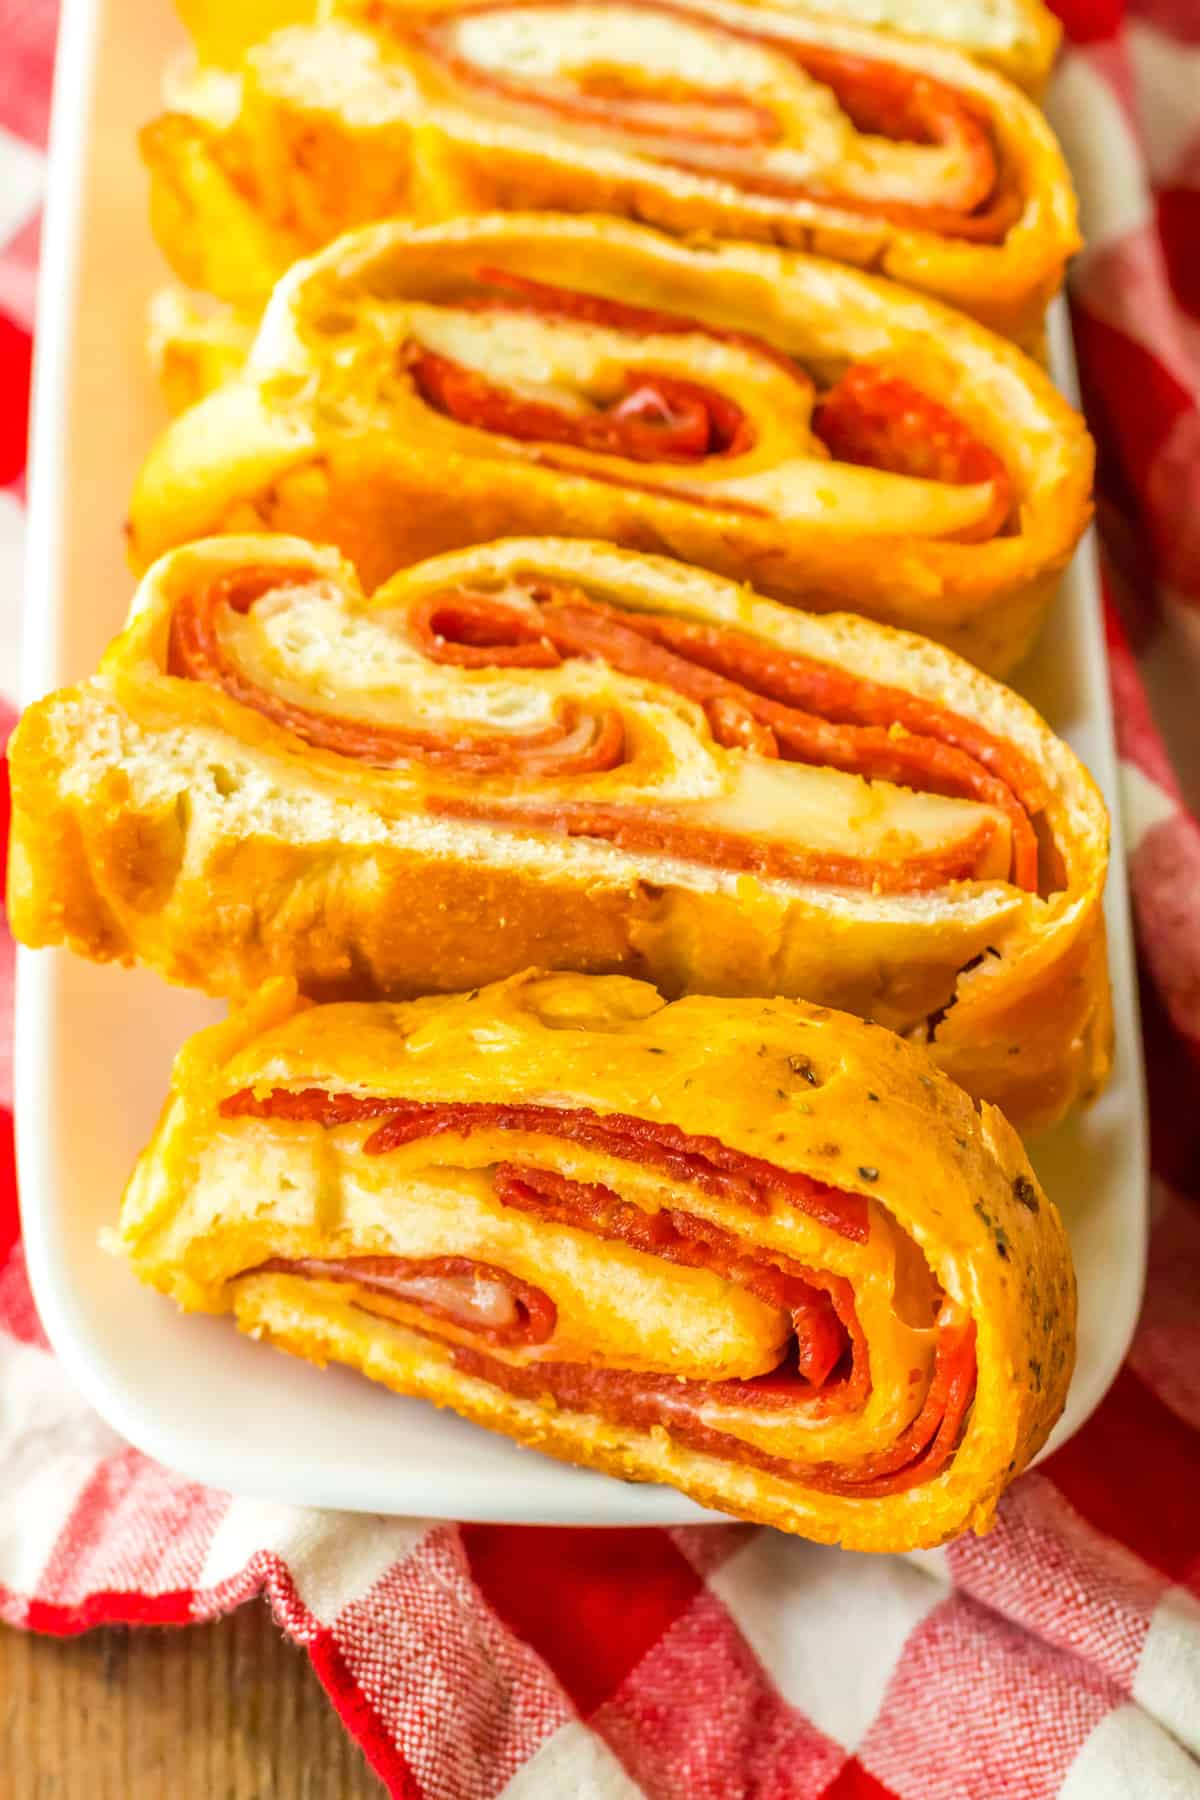 Pepperoni Bread with mozzarella cheese and pepperoni baked in bread dough.